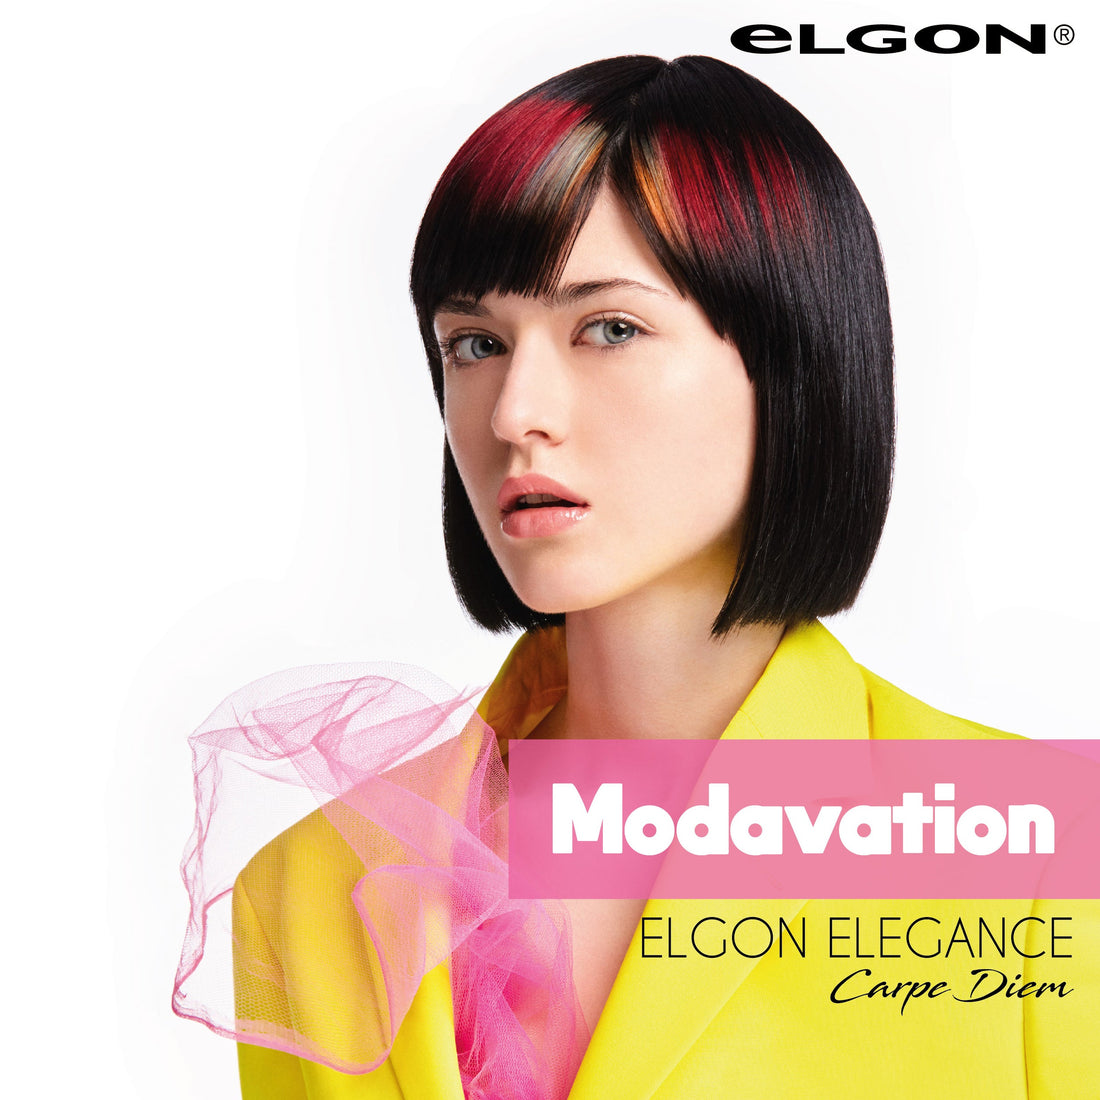 Two Elgon hair products to fall in love